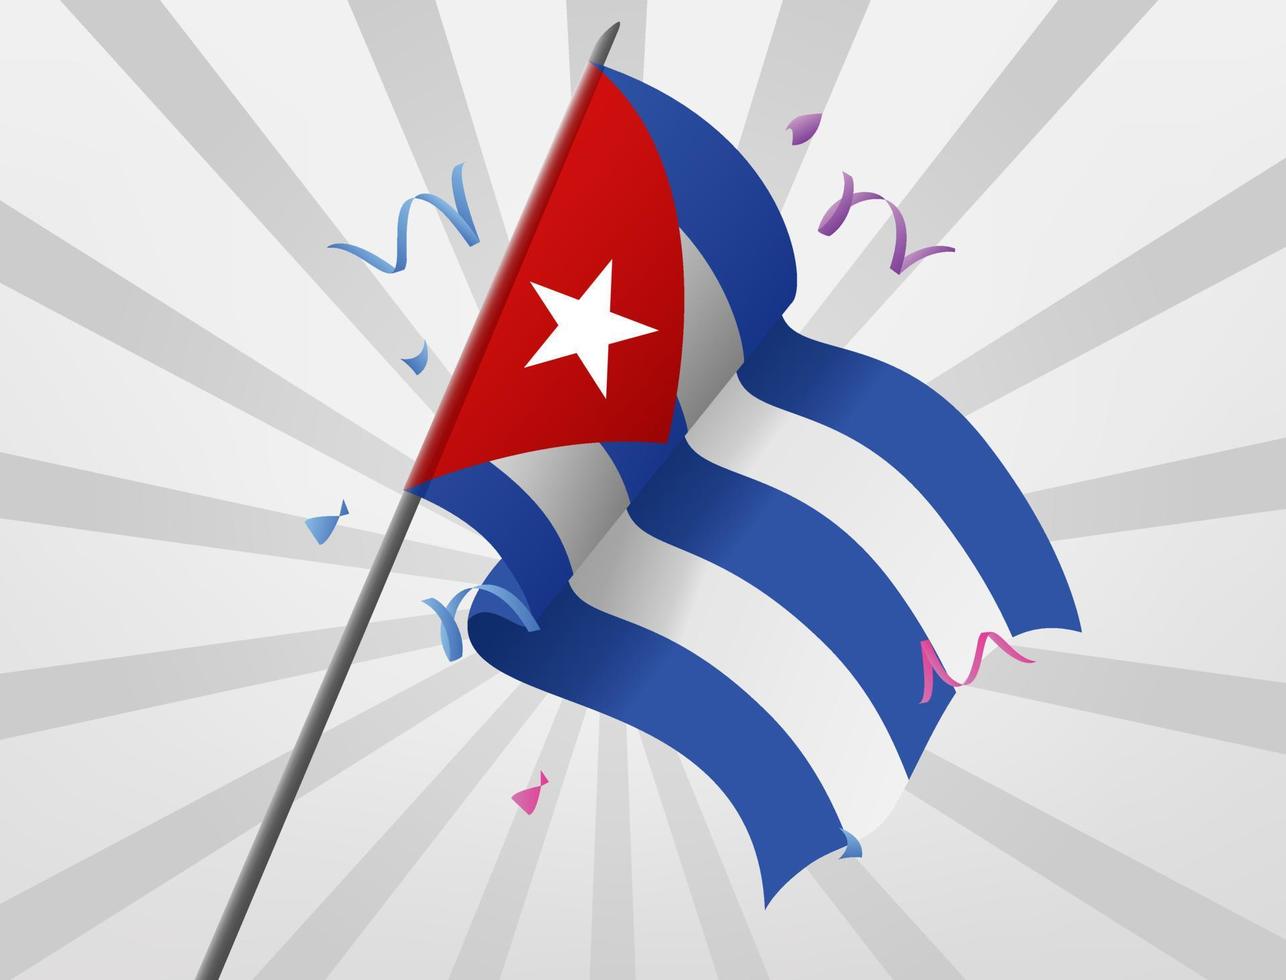 The Cuba celebratory flag flew at a height vector